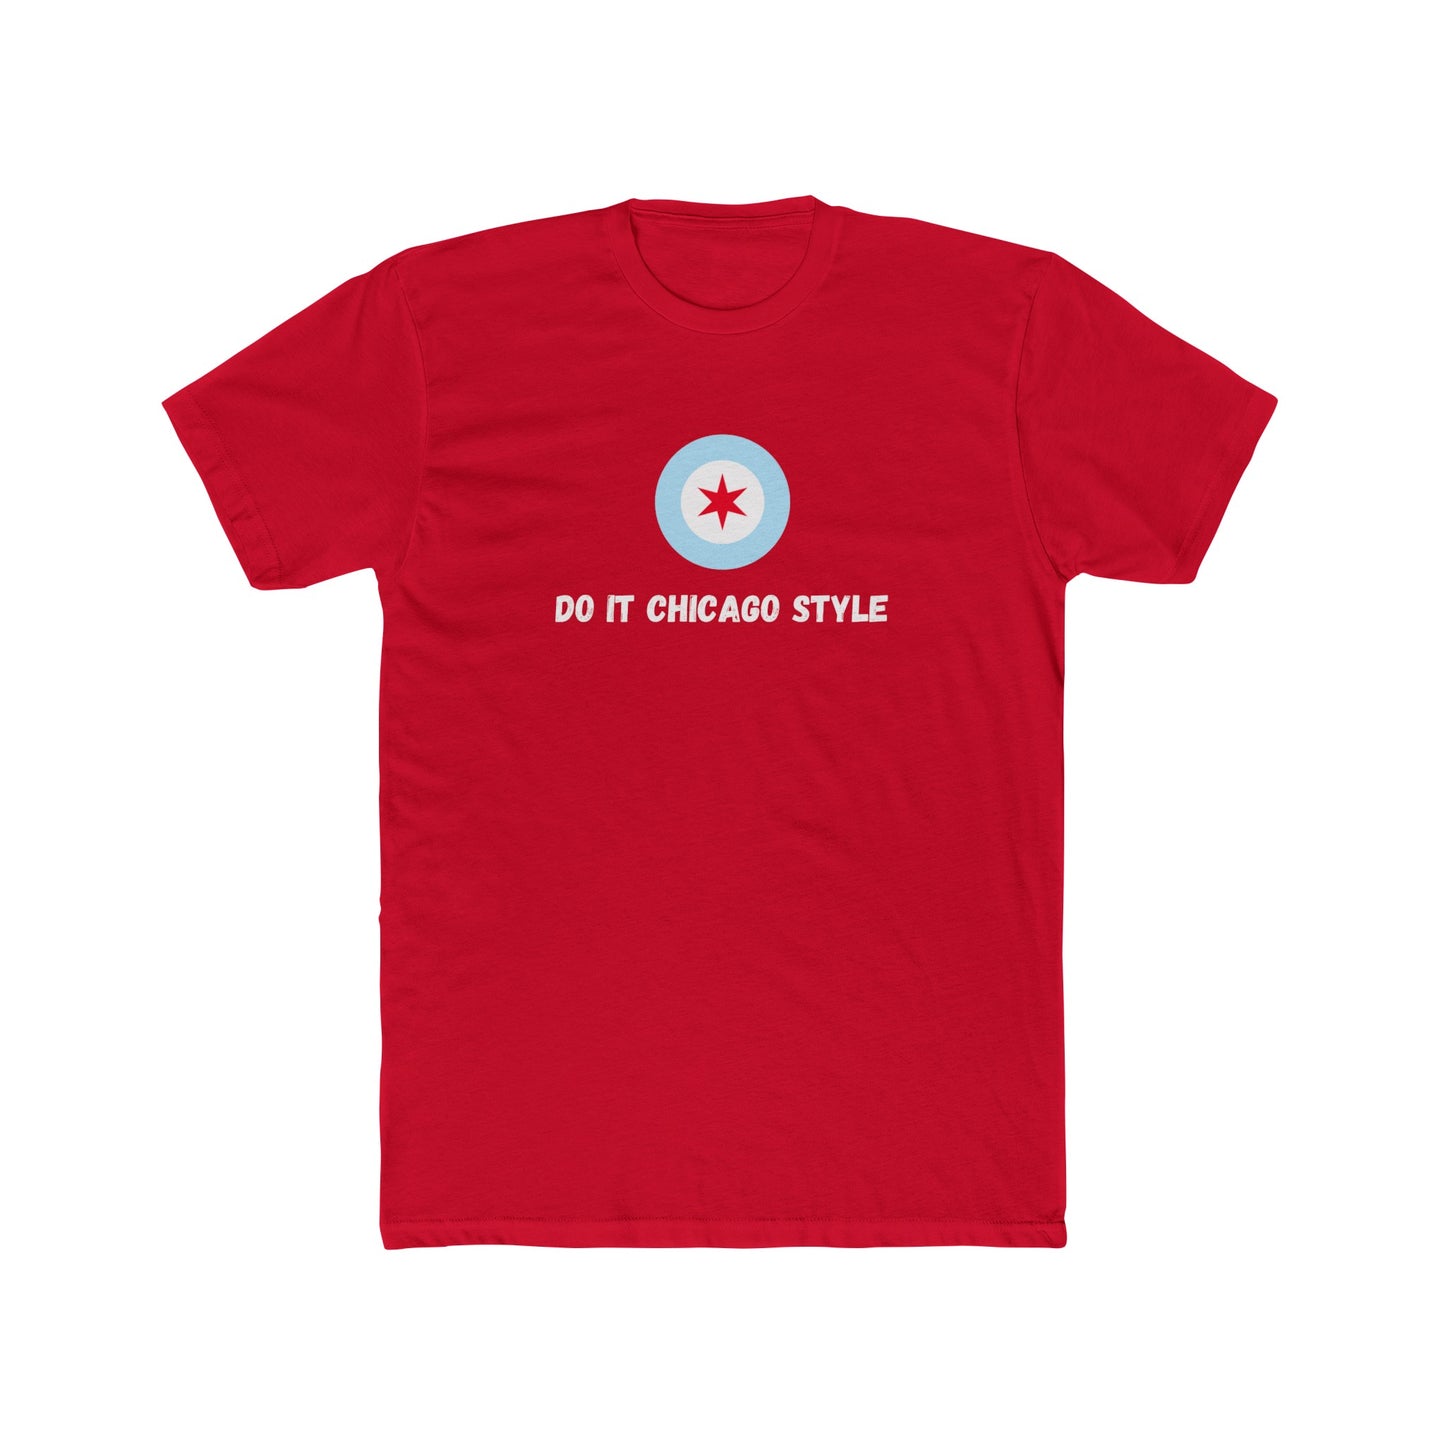 "Do It Chicago Style" T-Shirt